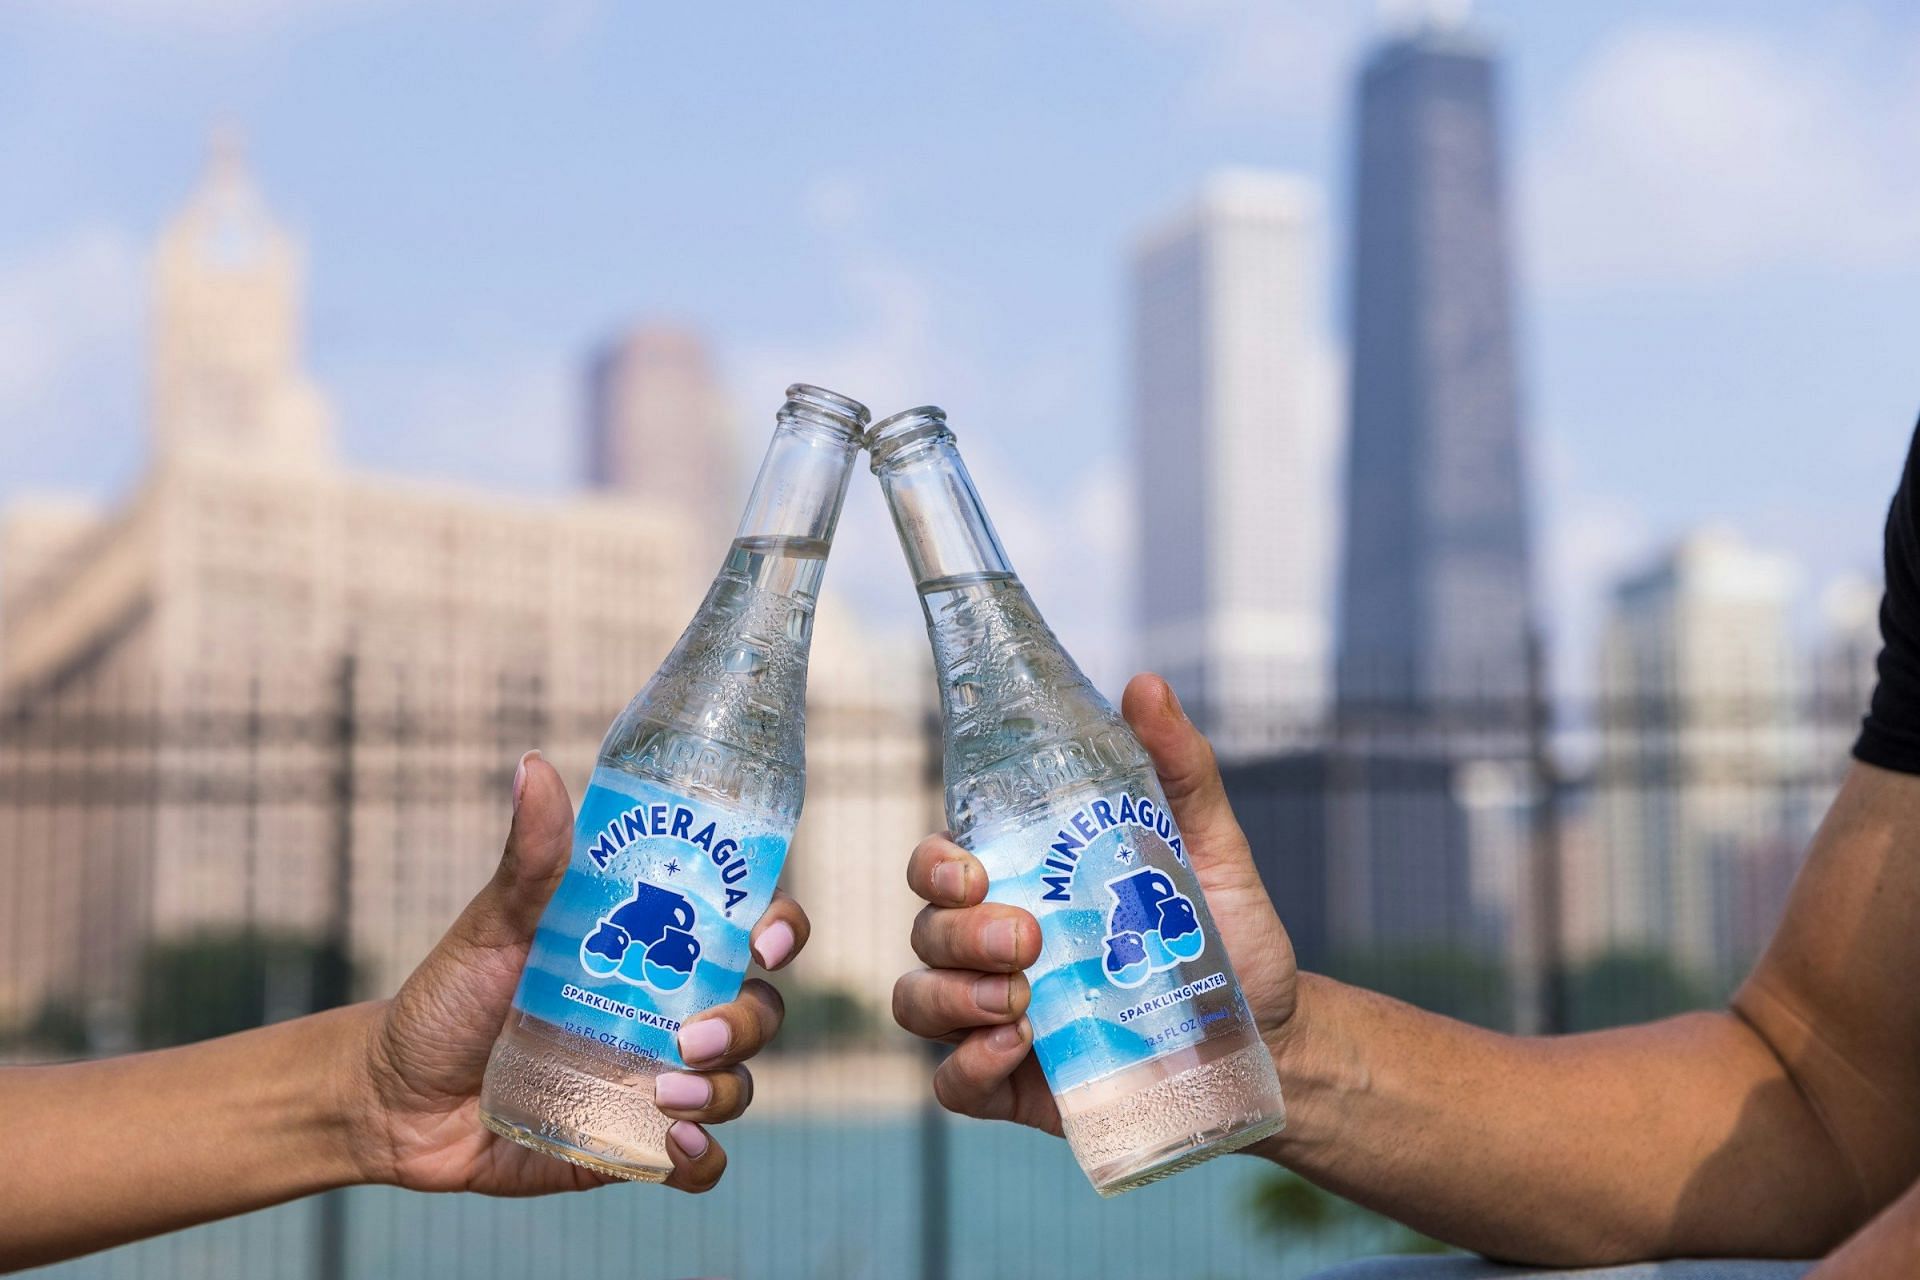 Benefits of Sparkling Water: It will motivate you to drink more water (Image by Mineragua Sparkling Water/Unsplash)